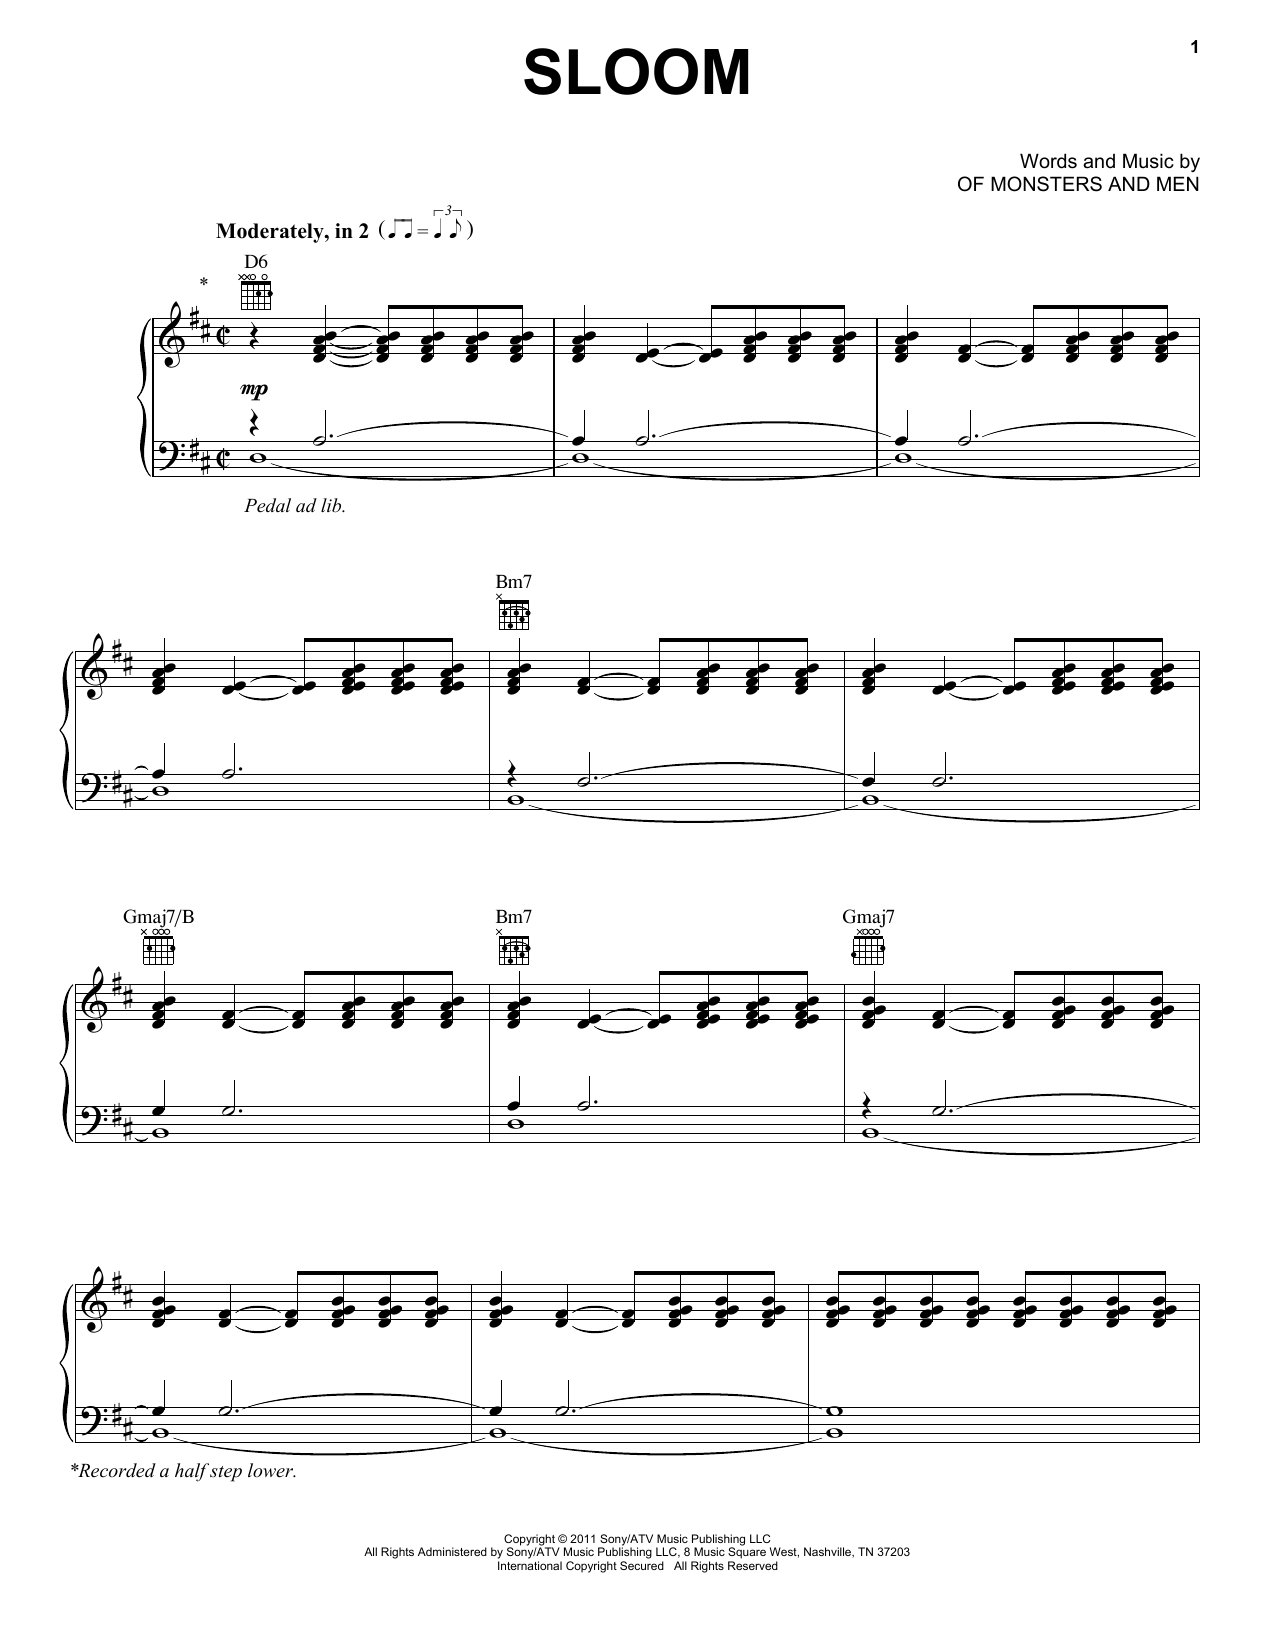 Download Of Monsters and Men Sloom Sheet Music